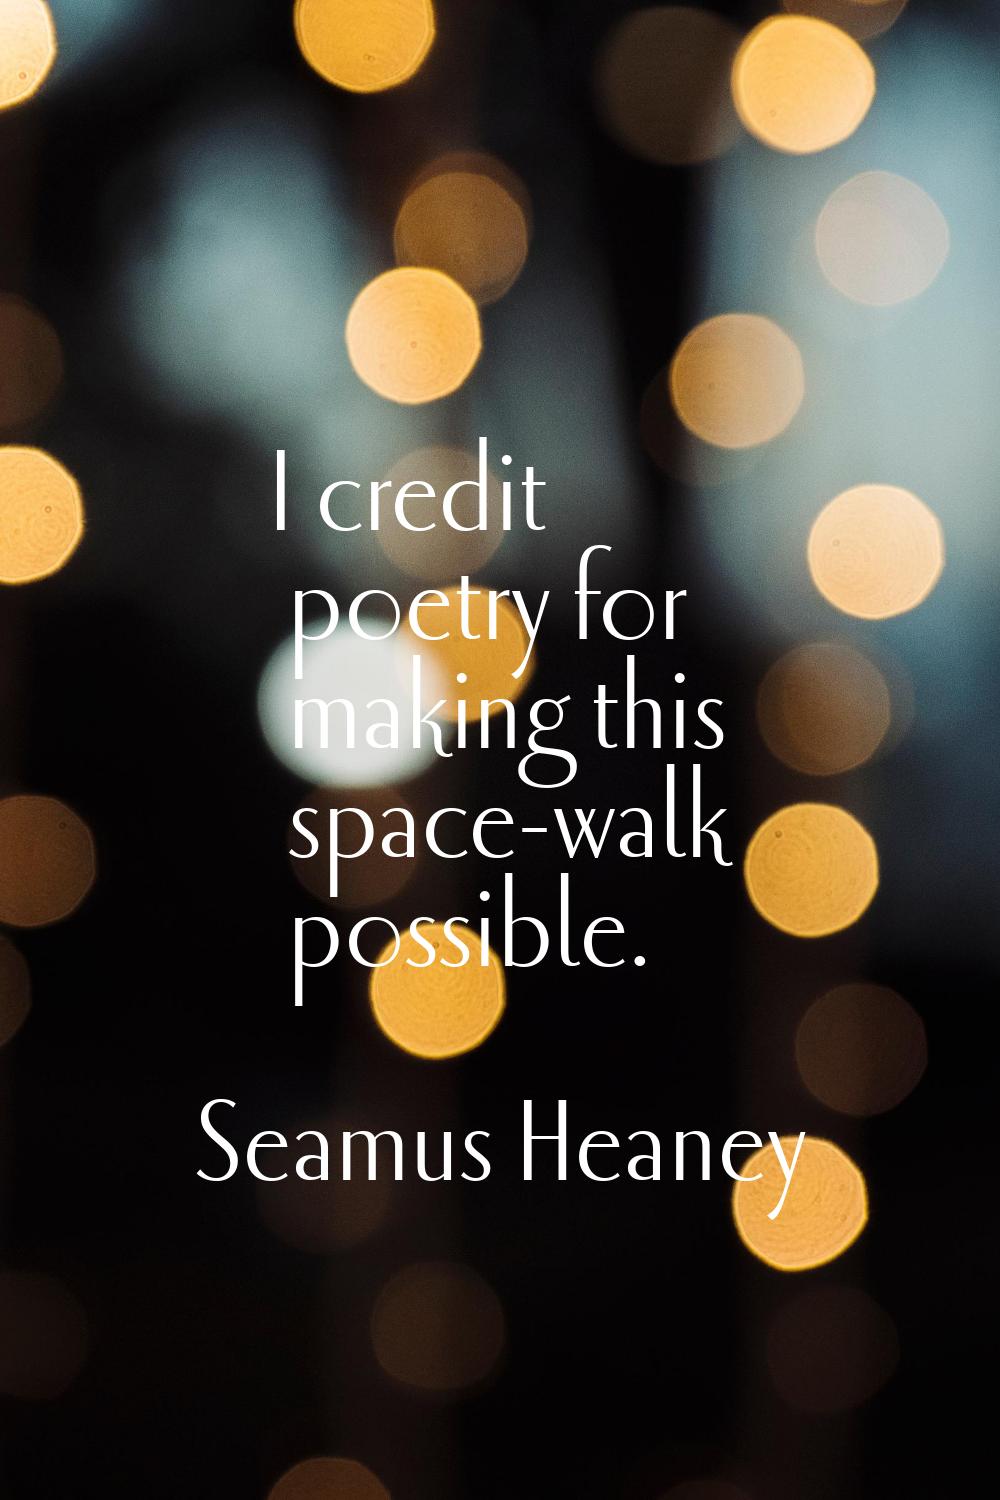 I credit poetry for making this space-walk possible.